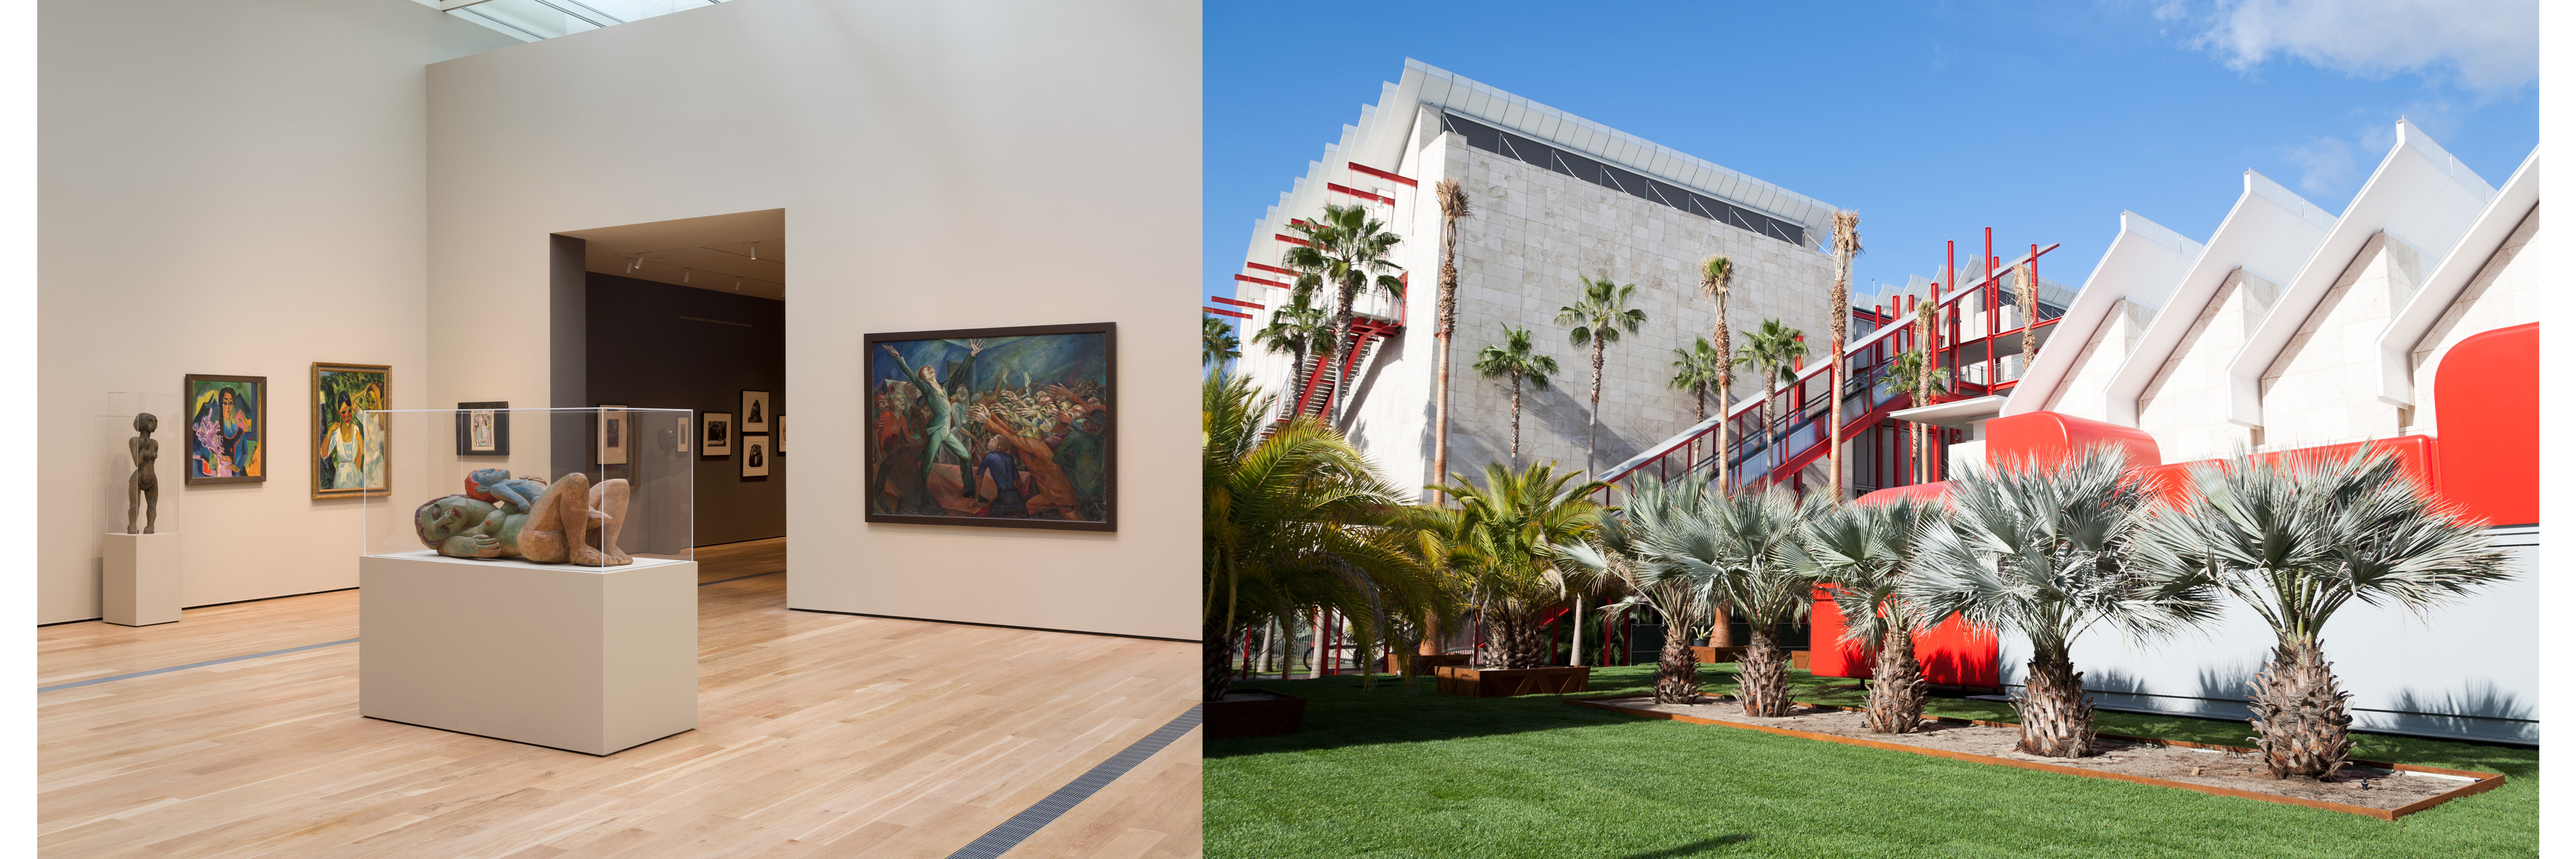 Installation view of the new Modern Art presentation on BCAM, Level 3, Los Angeles County Museum of Art, June 13, 2021–ongoing, photo © Fredrik Nilsen; Exterior of the Los Angeles County Museum of Art, photo © Museum Associates/LACMA